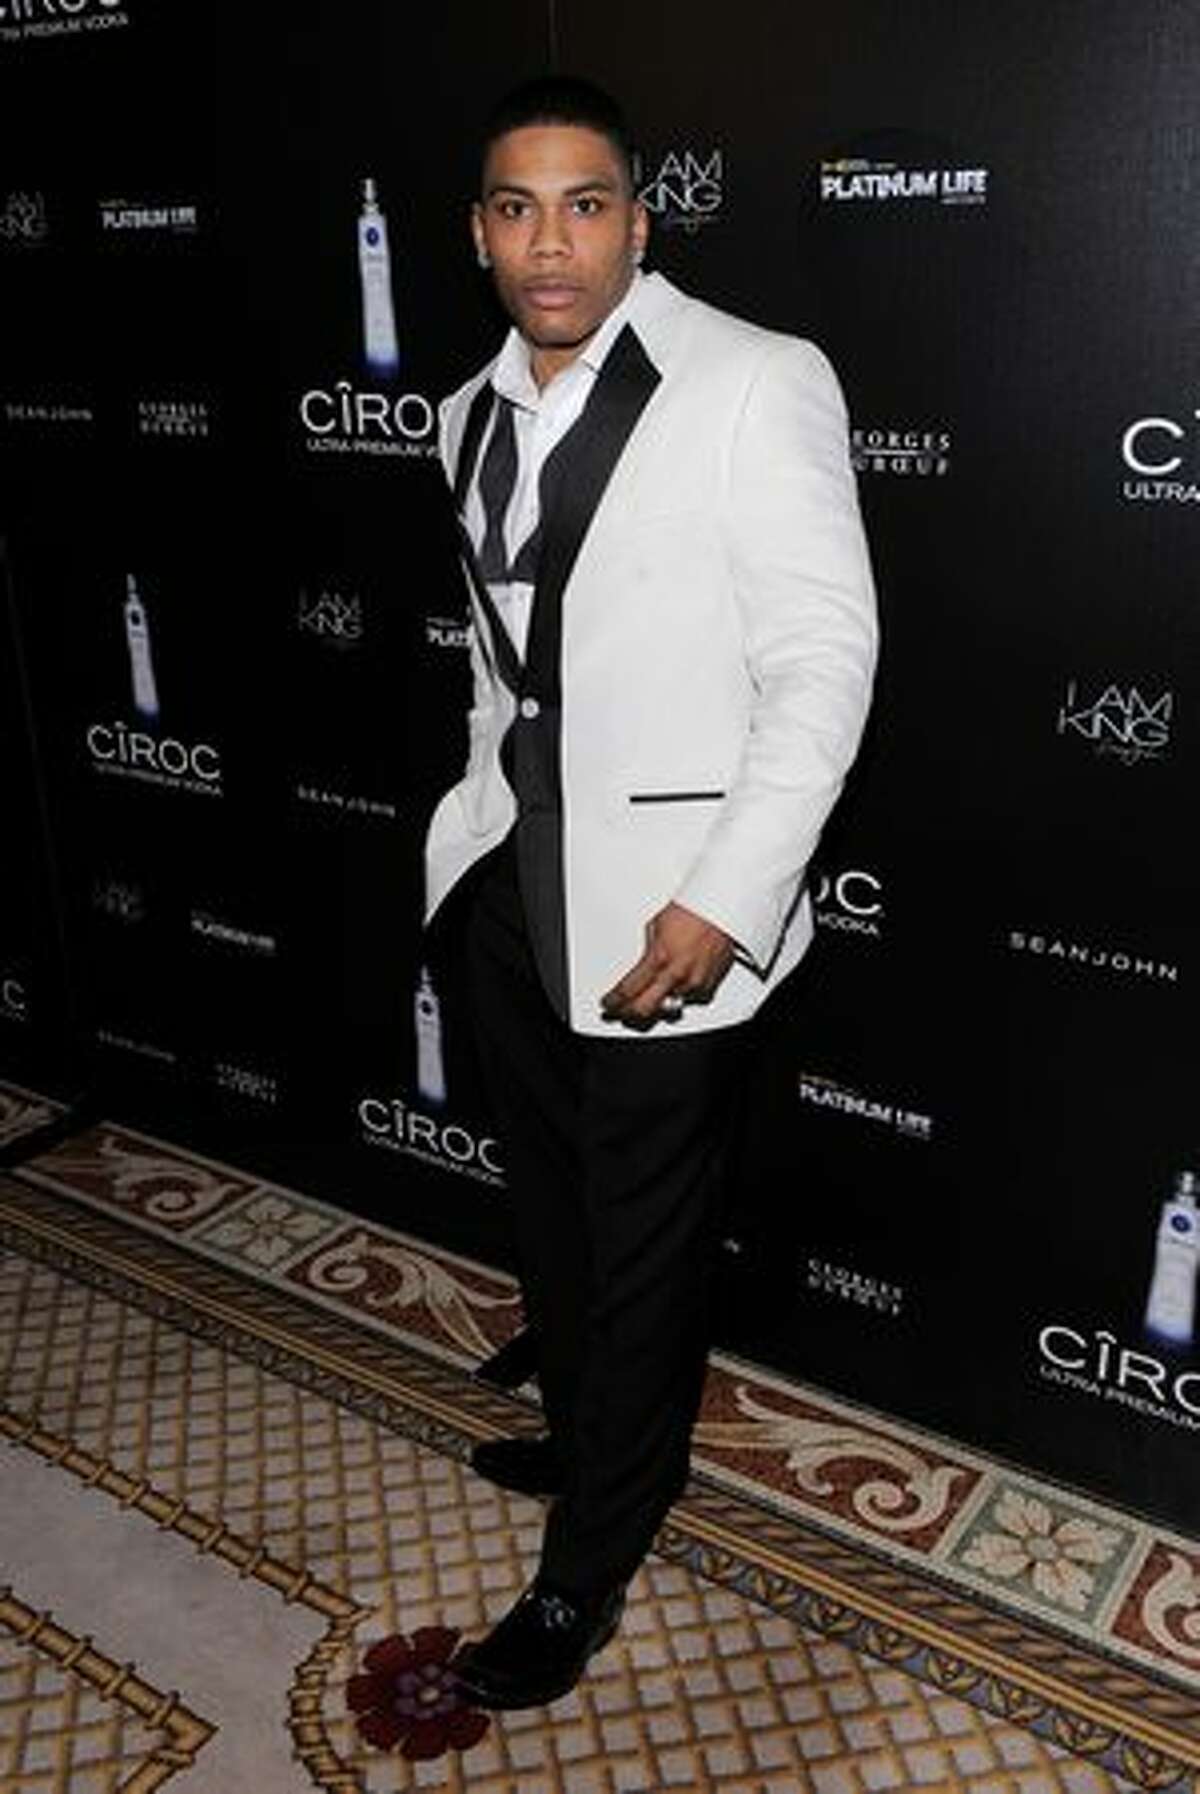 Singer Nelly attends the Sean "Diddy" Combs' Birthday Celebration Presented by Ciroc Vodka at The Grand Ballroom at The Plaza Hotel in New York City.